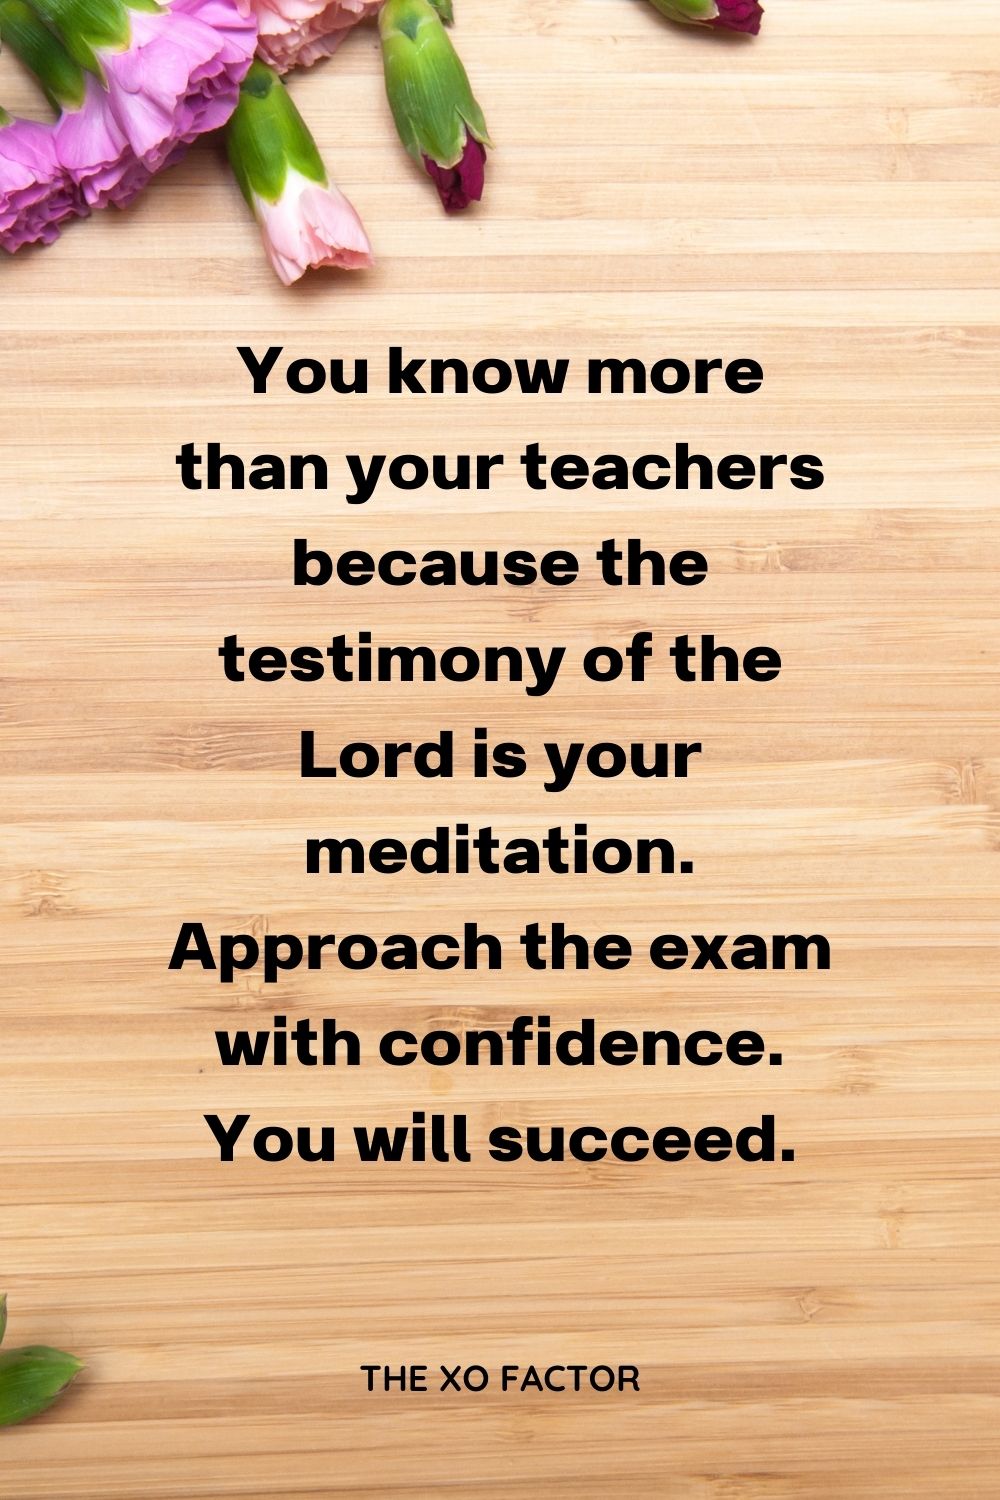 You know more than your teachers because the testimony of the Lord is your meditation. Approach the exam with confidence. You will succeed.